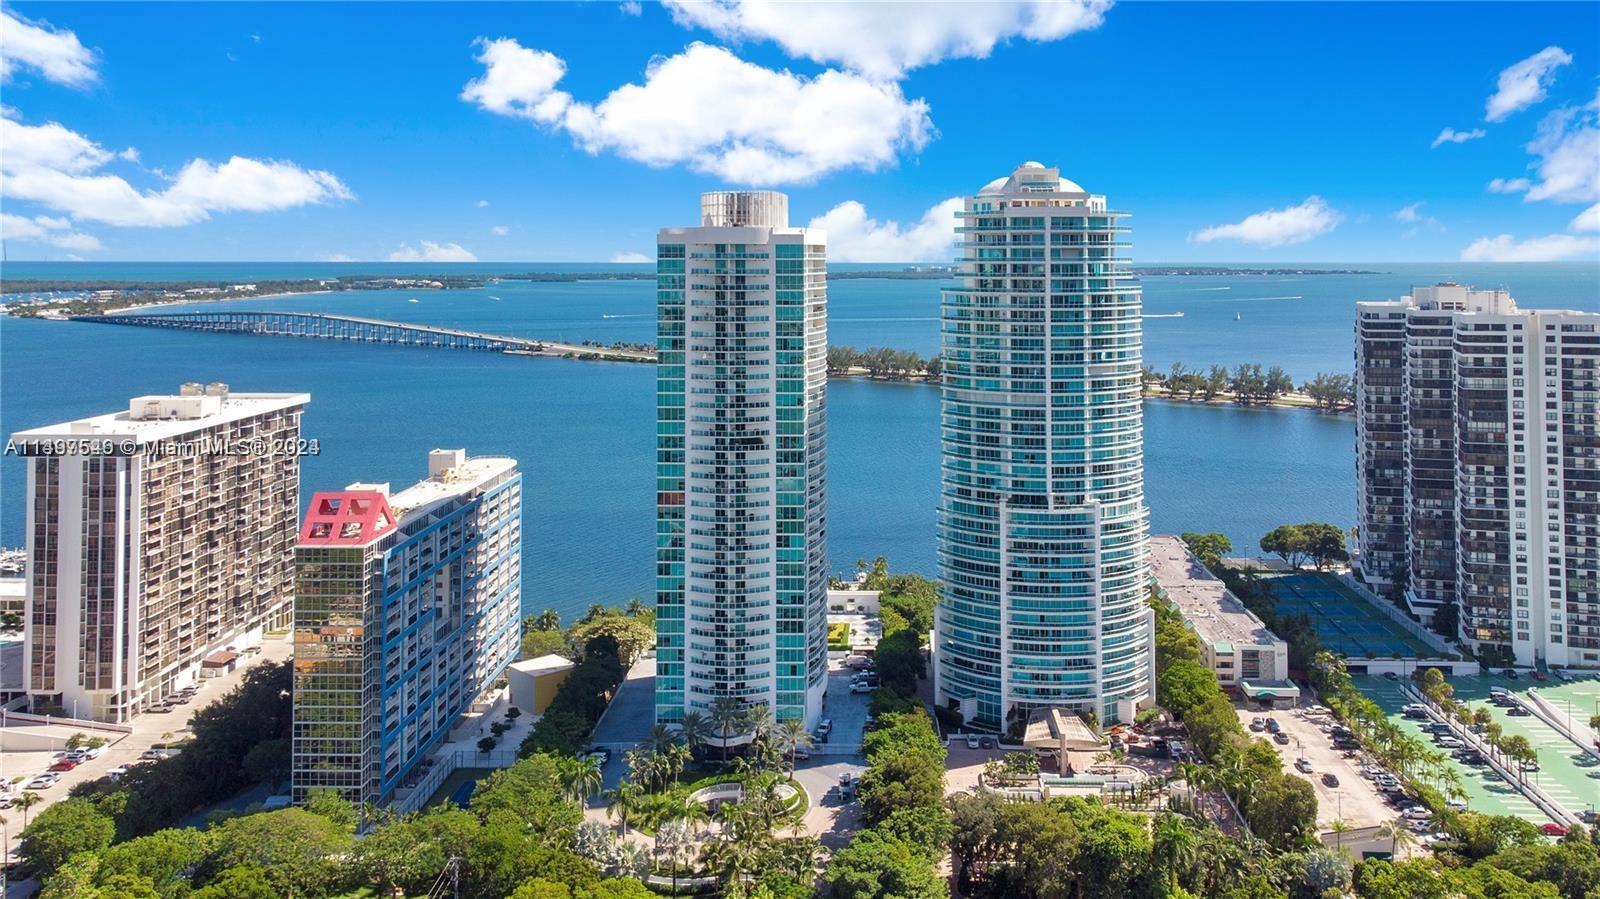 FABULOUS 2 BEDROOMS AND 2 BATHROOMS RESIDENCE LOCATED AT THE RENOWNED SKYLINE ON BRICKELL WITH BREAT